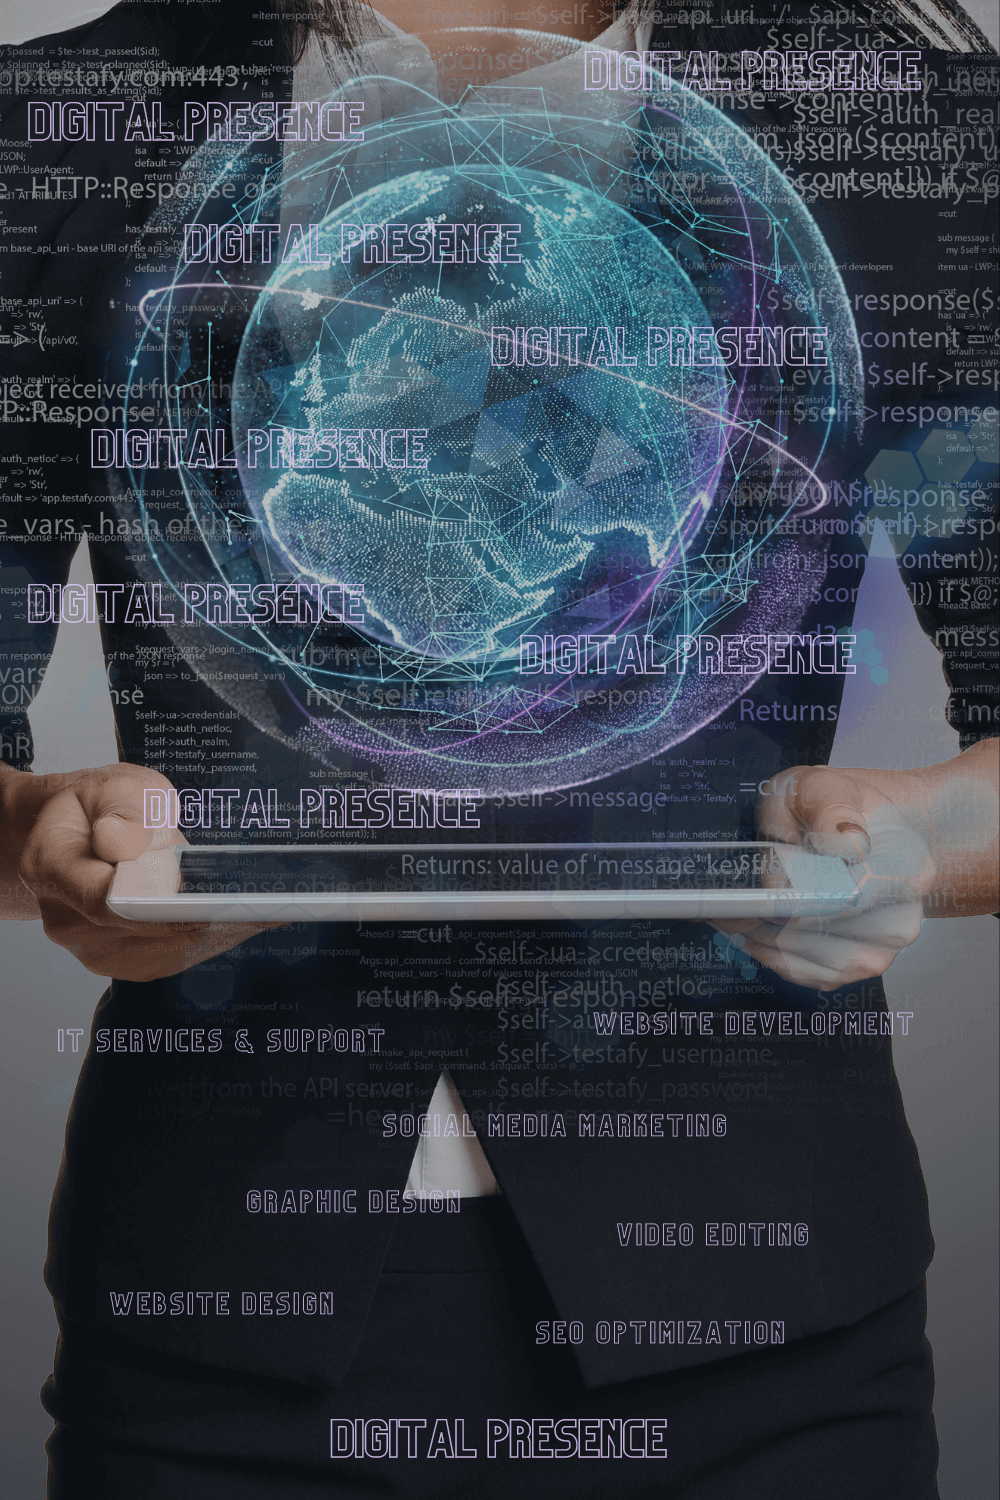 A person holding a tablet, with a holographic globe surrounded by digital interfaces and text related to digital presence, showcasing the integration of technology in enhancing online visibility.